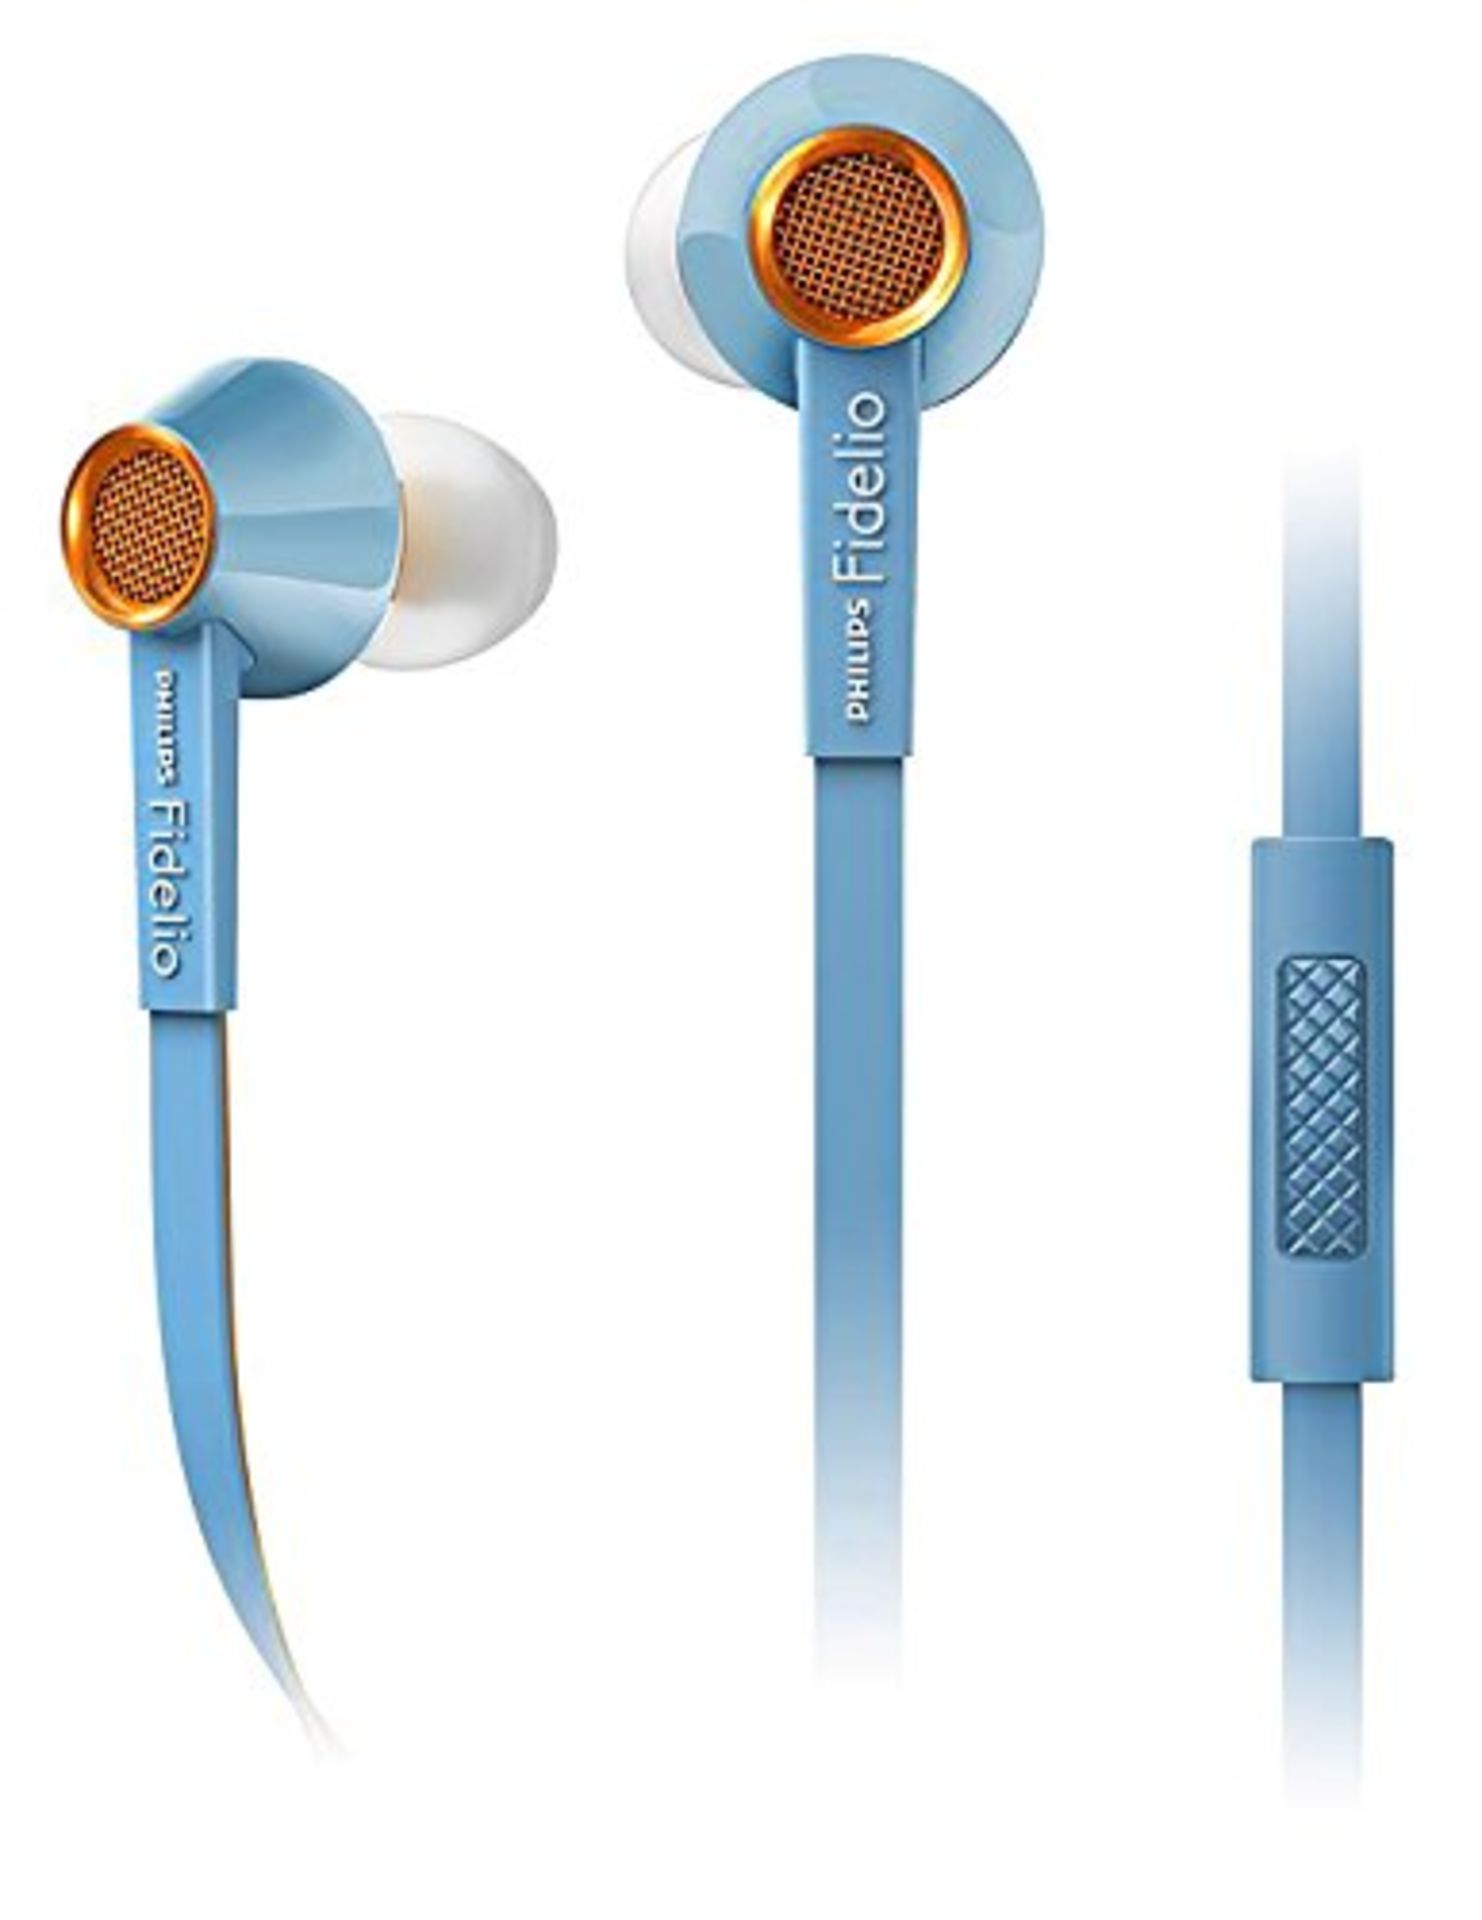 V Brand New Philips Fidelio In-Ear Headphones With Mic S2LB/00 - In Line Remote/Microphone -